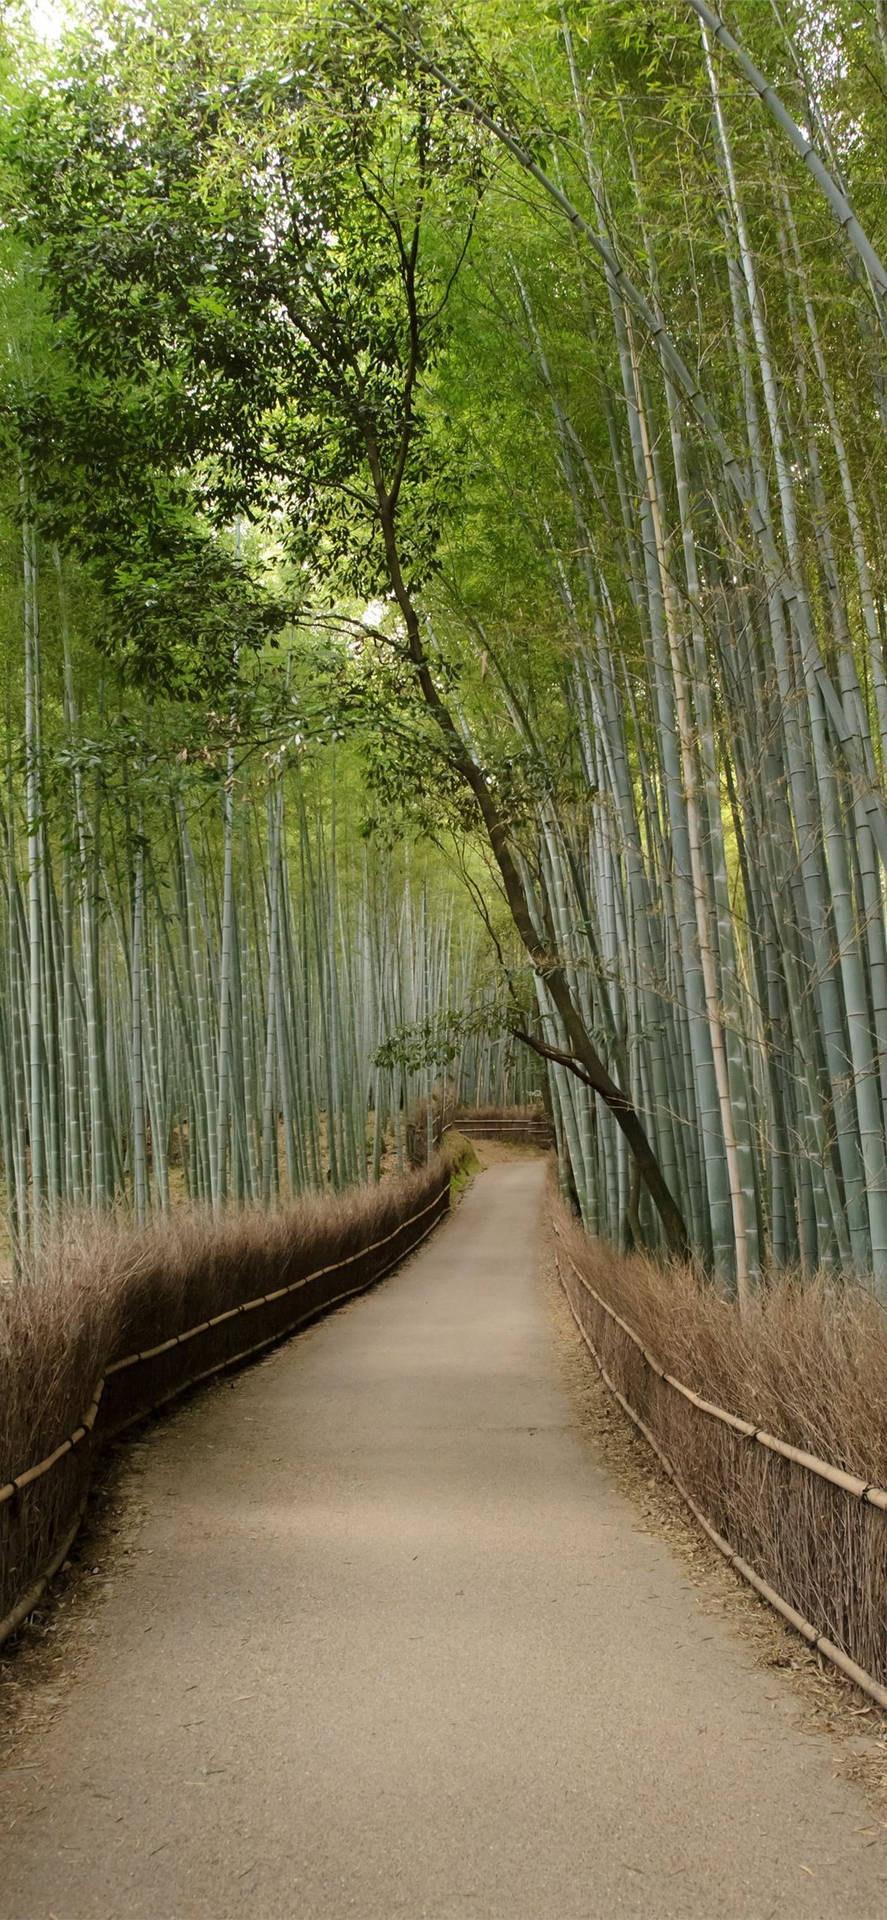 Clean Bamboo Pathway IPhone Wallpaper